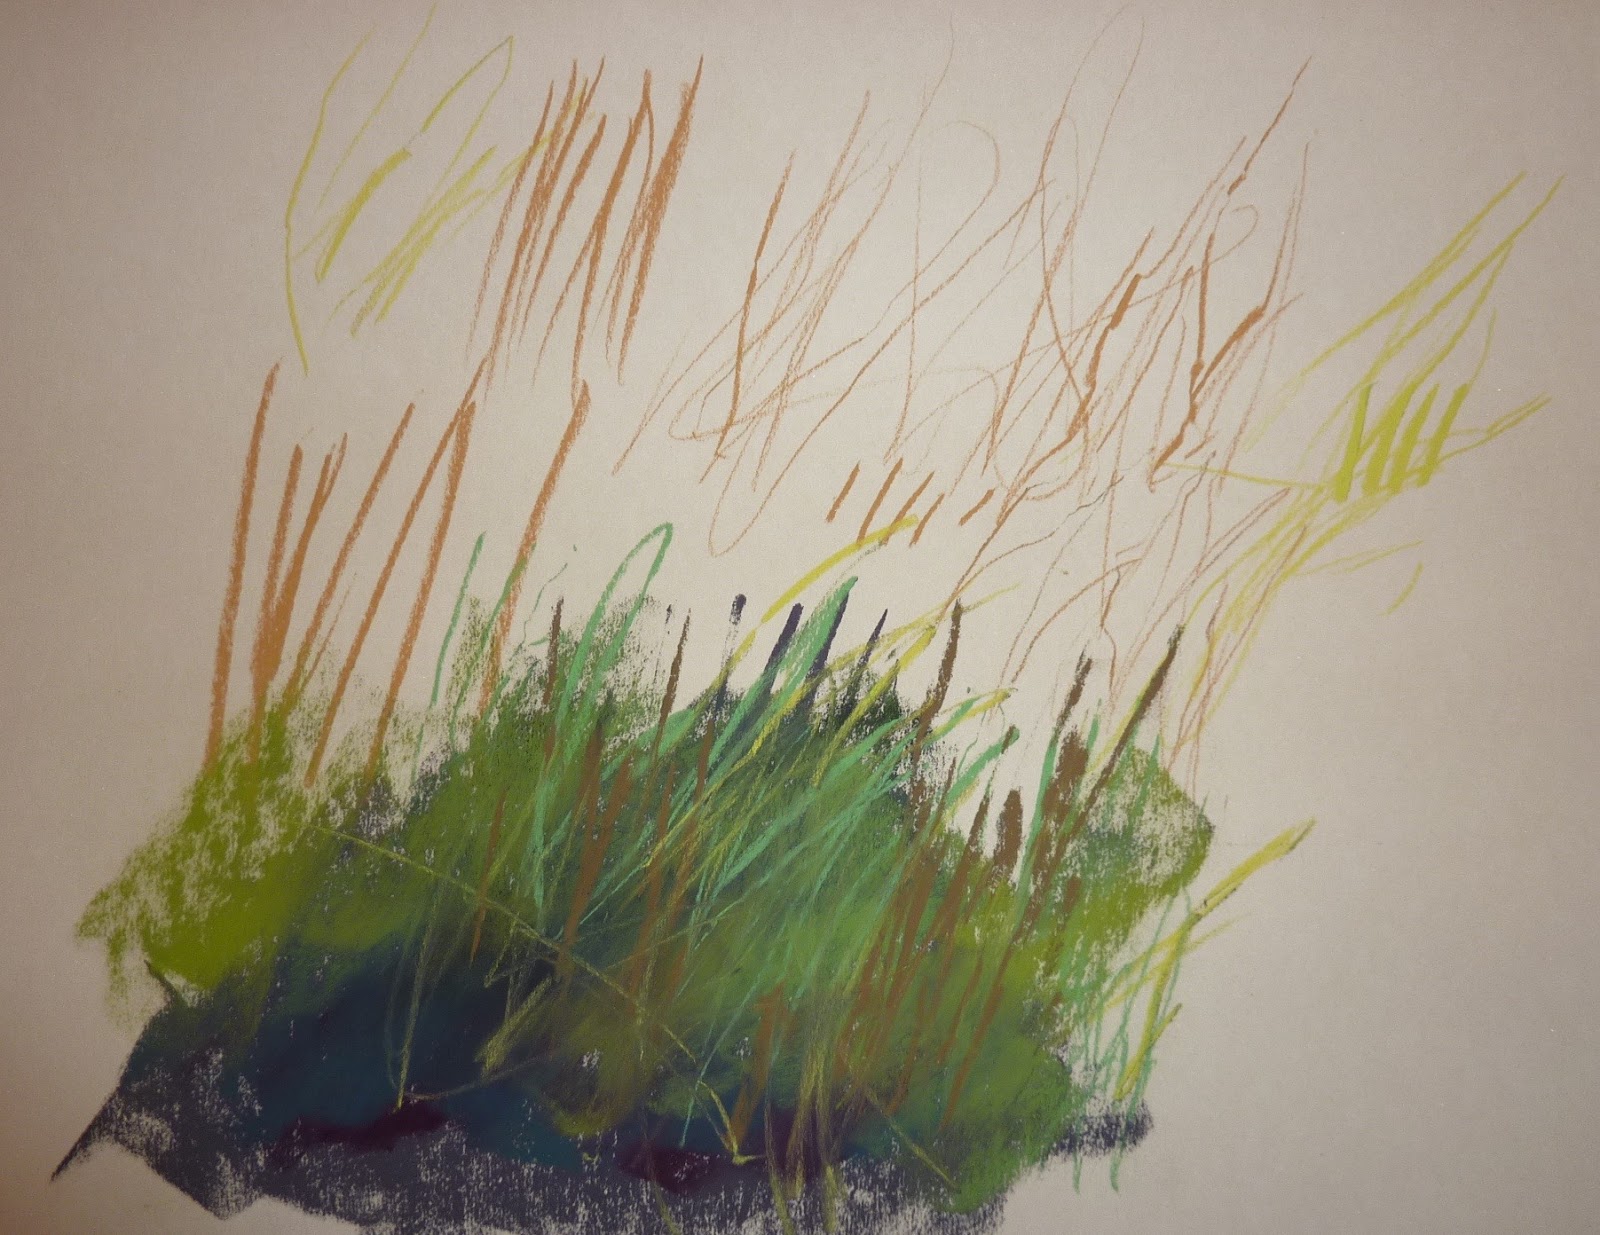 Painting My World: How to Paint Grass with Pastels...New YouTube Video